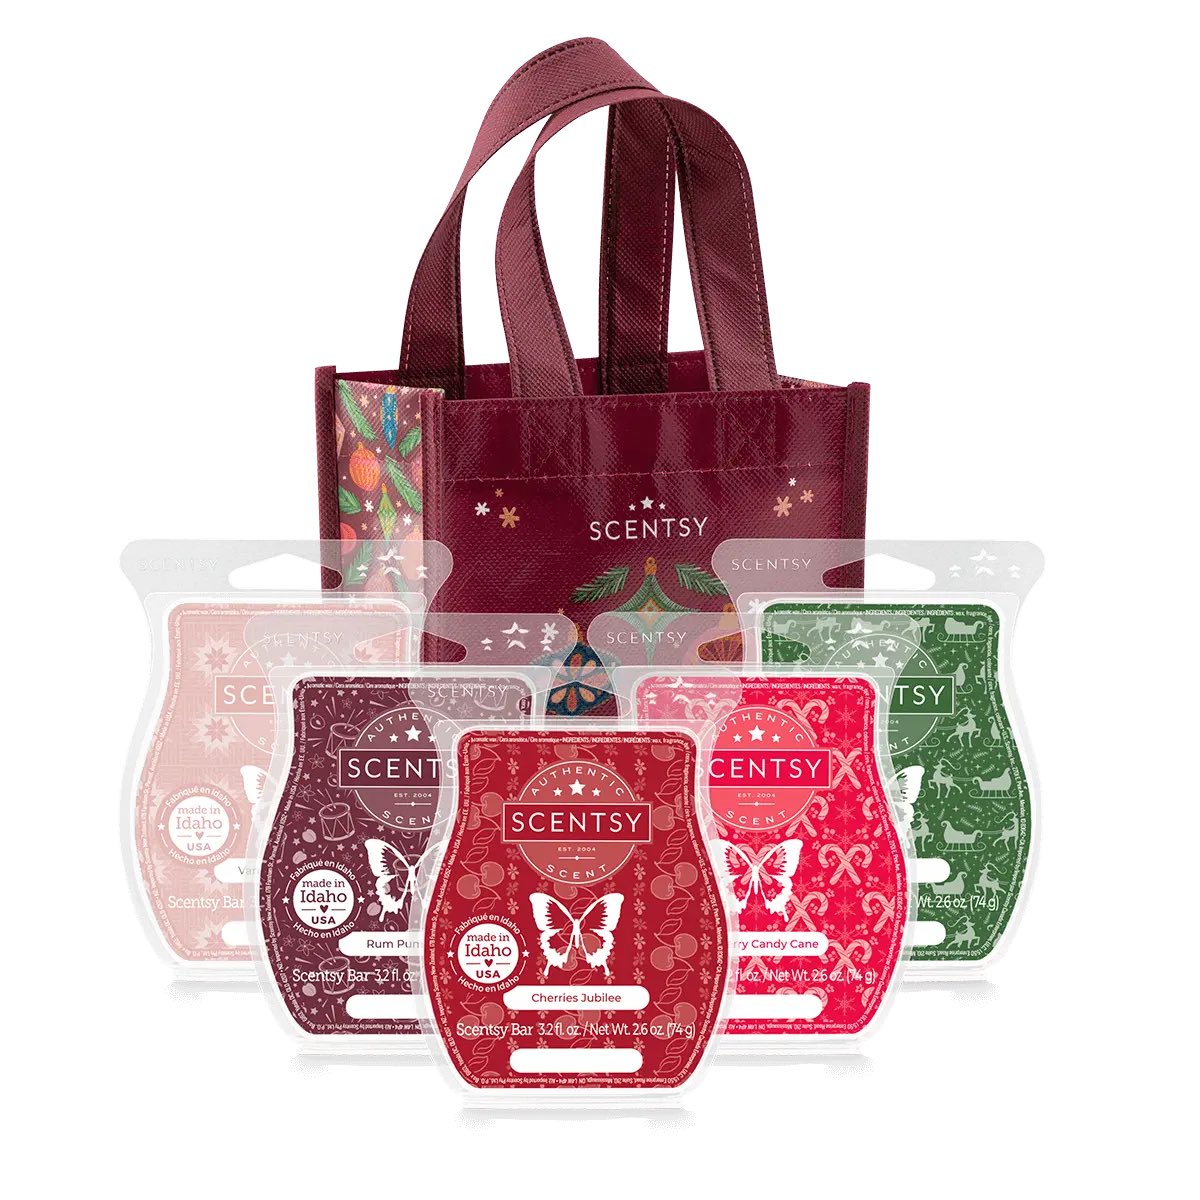 ❄️Holiday Scentsy Bar 5-Pack❄️

A set of five all-new Scentsy Bars bundled in a festive gift bag.

#secawards #rajasthankelabharthi #vivaelpoderpopular #wtcfinal2023 #top100kpopvocalists #bitcoin #nft
#holidayseason